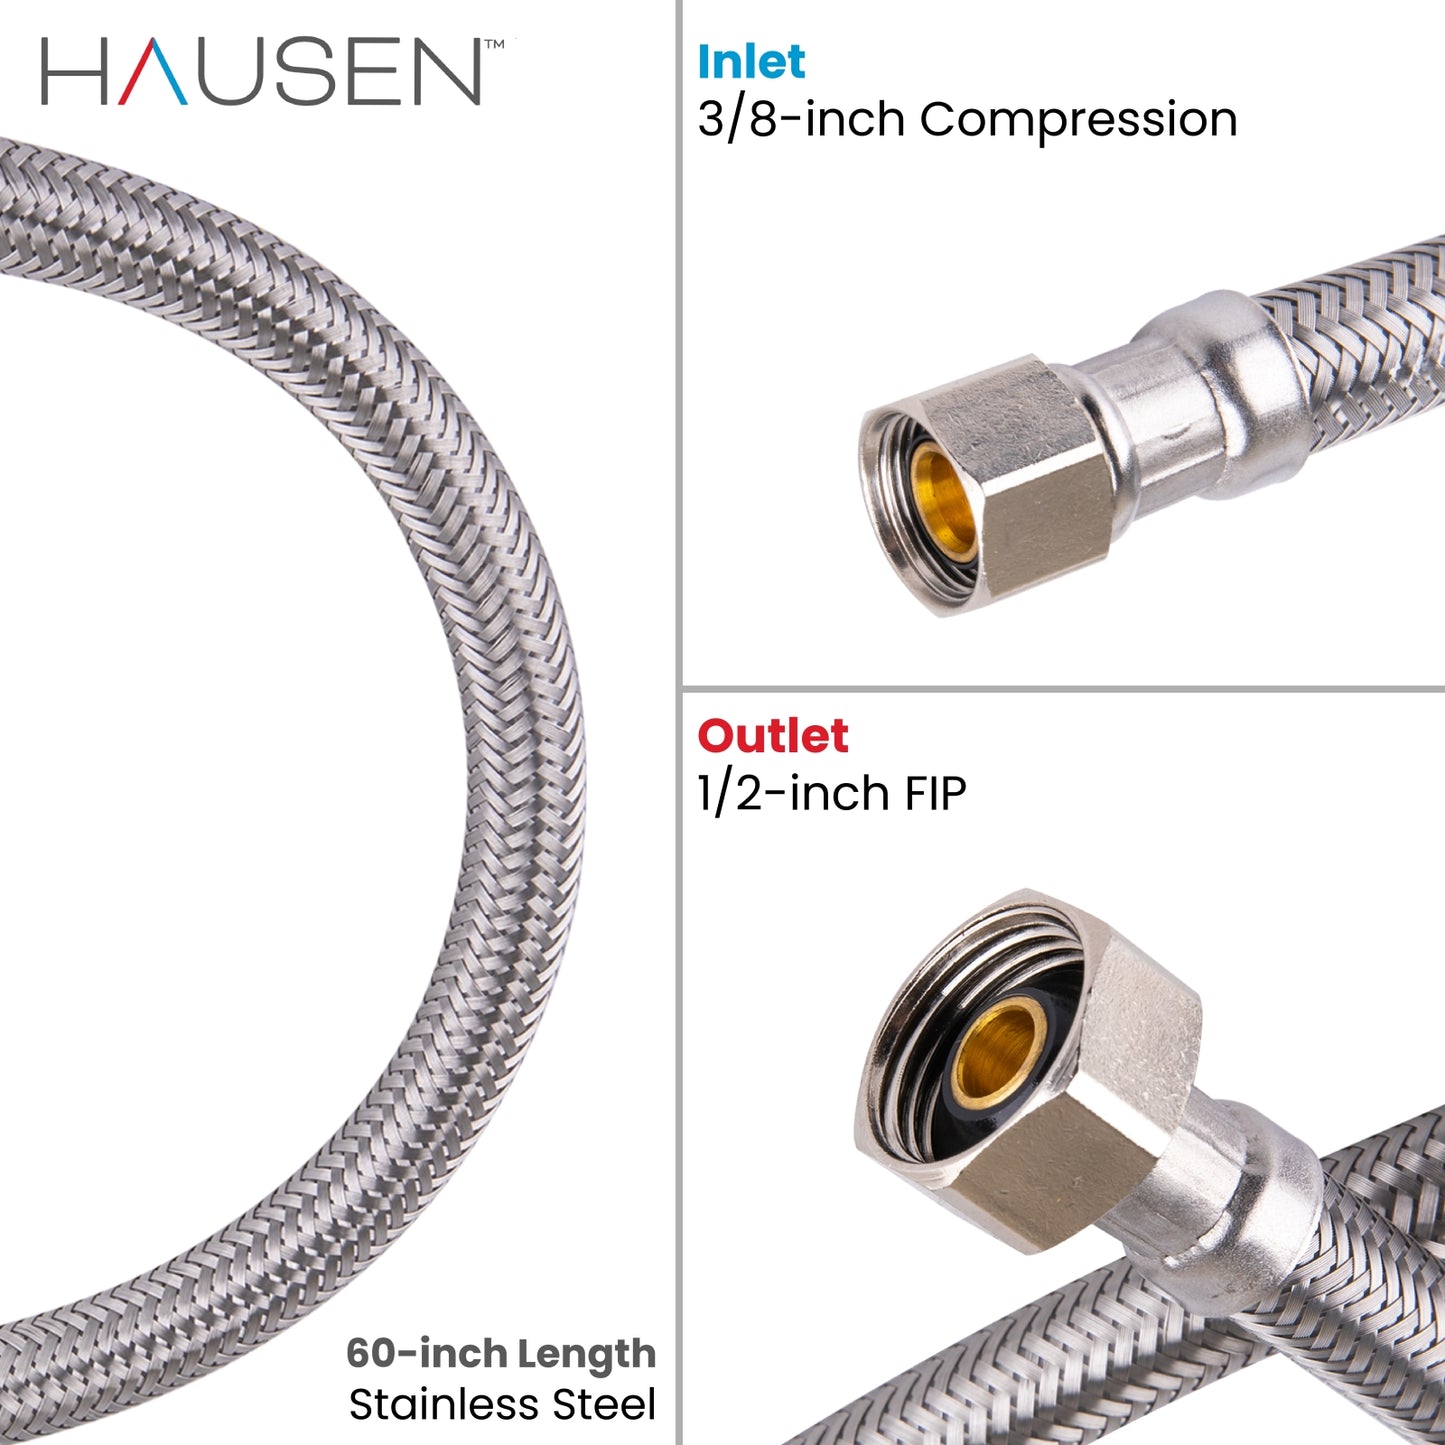 Hausen 3/8-inch Compression x 1/2-inch FIP (Female Iron Pipe) x 60-inch Length Stainless Steel Faucet Water Supply Connector; Lead Free; cUPC and NSF-61 Certified; Compatible with Standard Faucets, 2-Pack